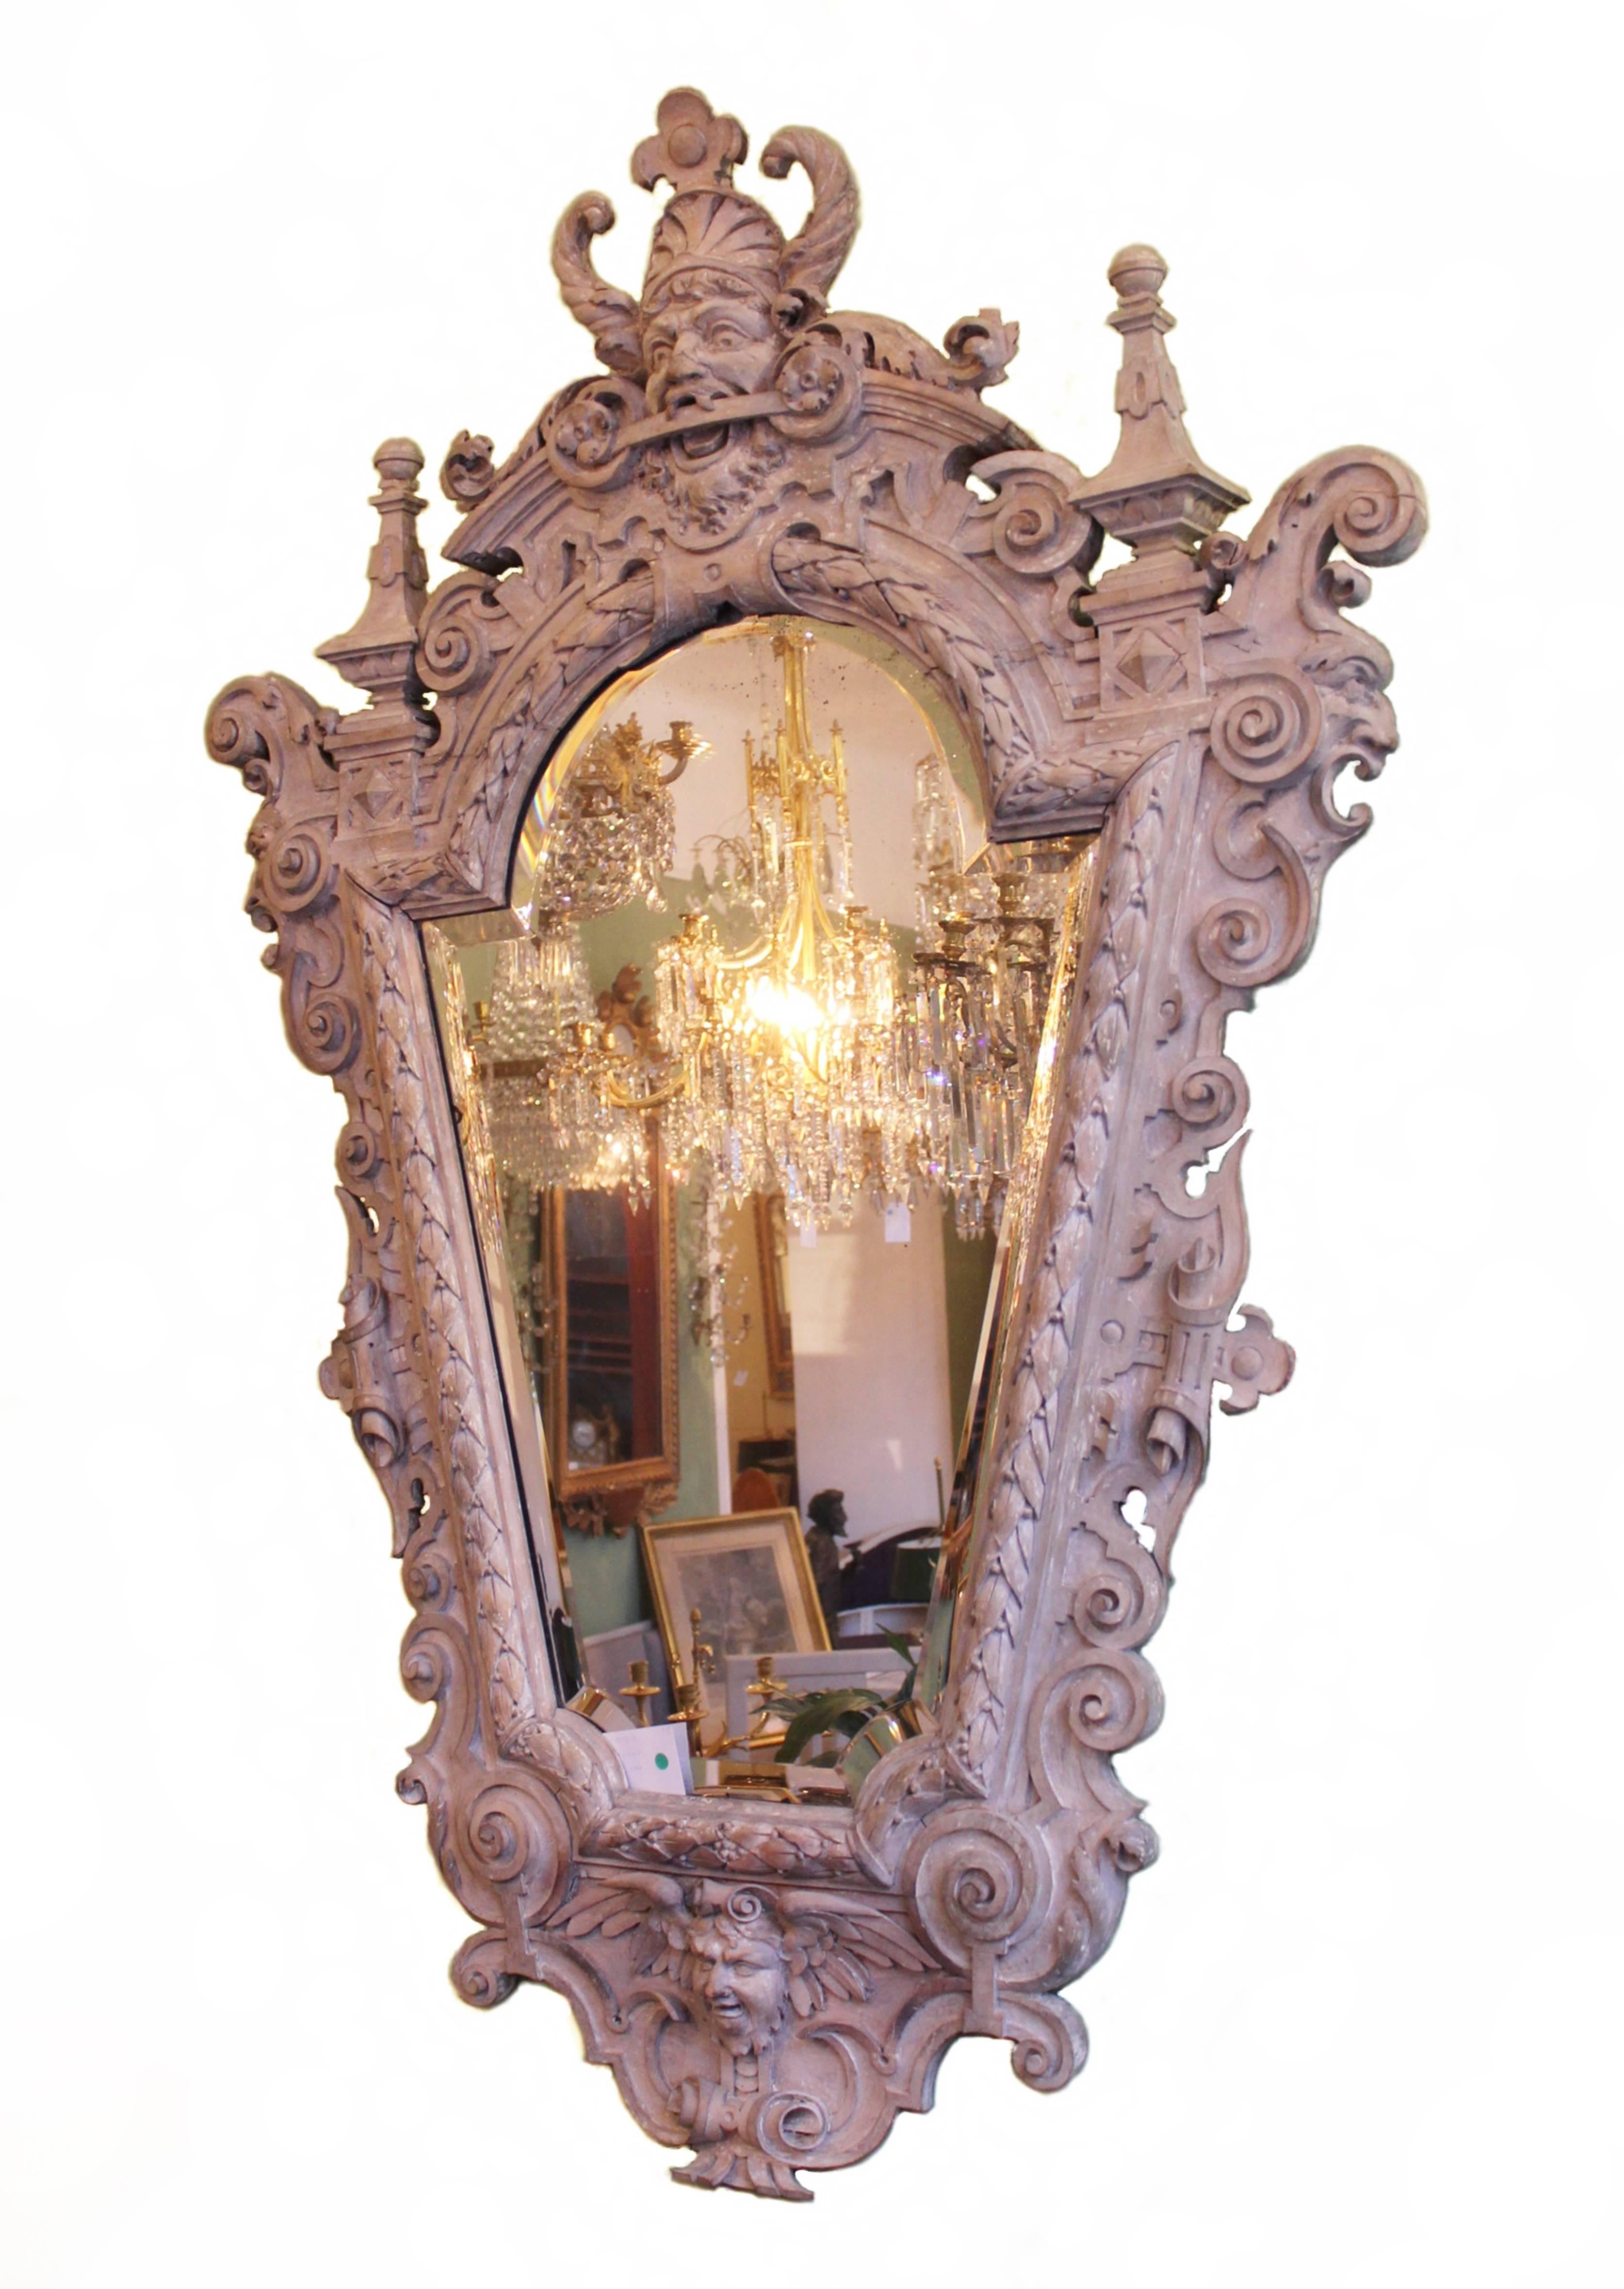 A truly imposing and beautiful grey painted wooden mirror. Richly carved and ornamental of superb quality. The mirror-glass is original. The mirror is quite hard to date but made in the 19th century or earlier.